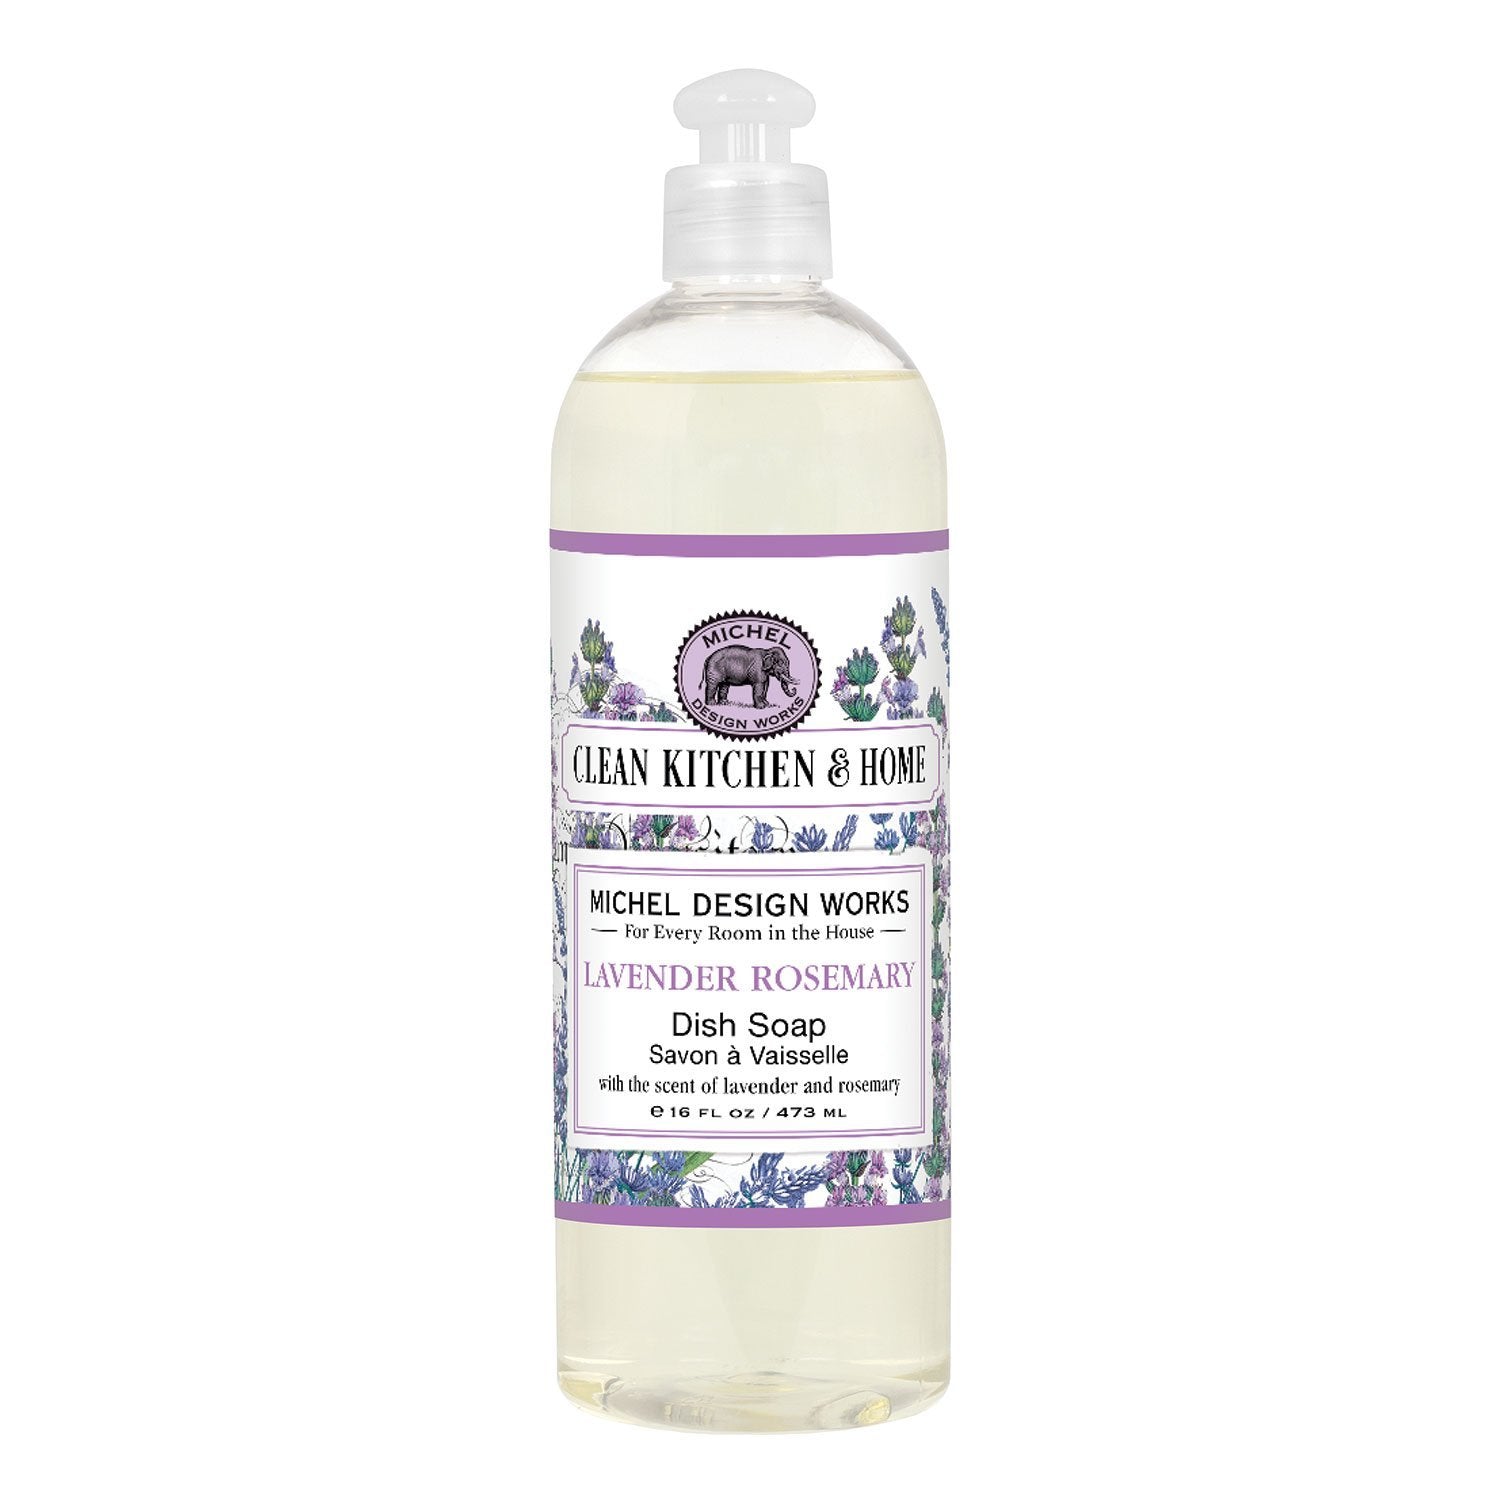 Lavender Rosemary combines two fragrant botanicals in one lovely, popular scent. Washing dishes may be a chore, but the effectiveness and amazing fragrance of this dish soap will lighten the task and make dishes sparkle.